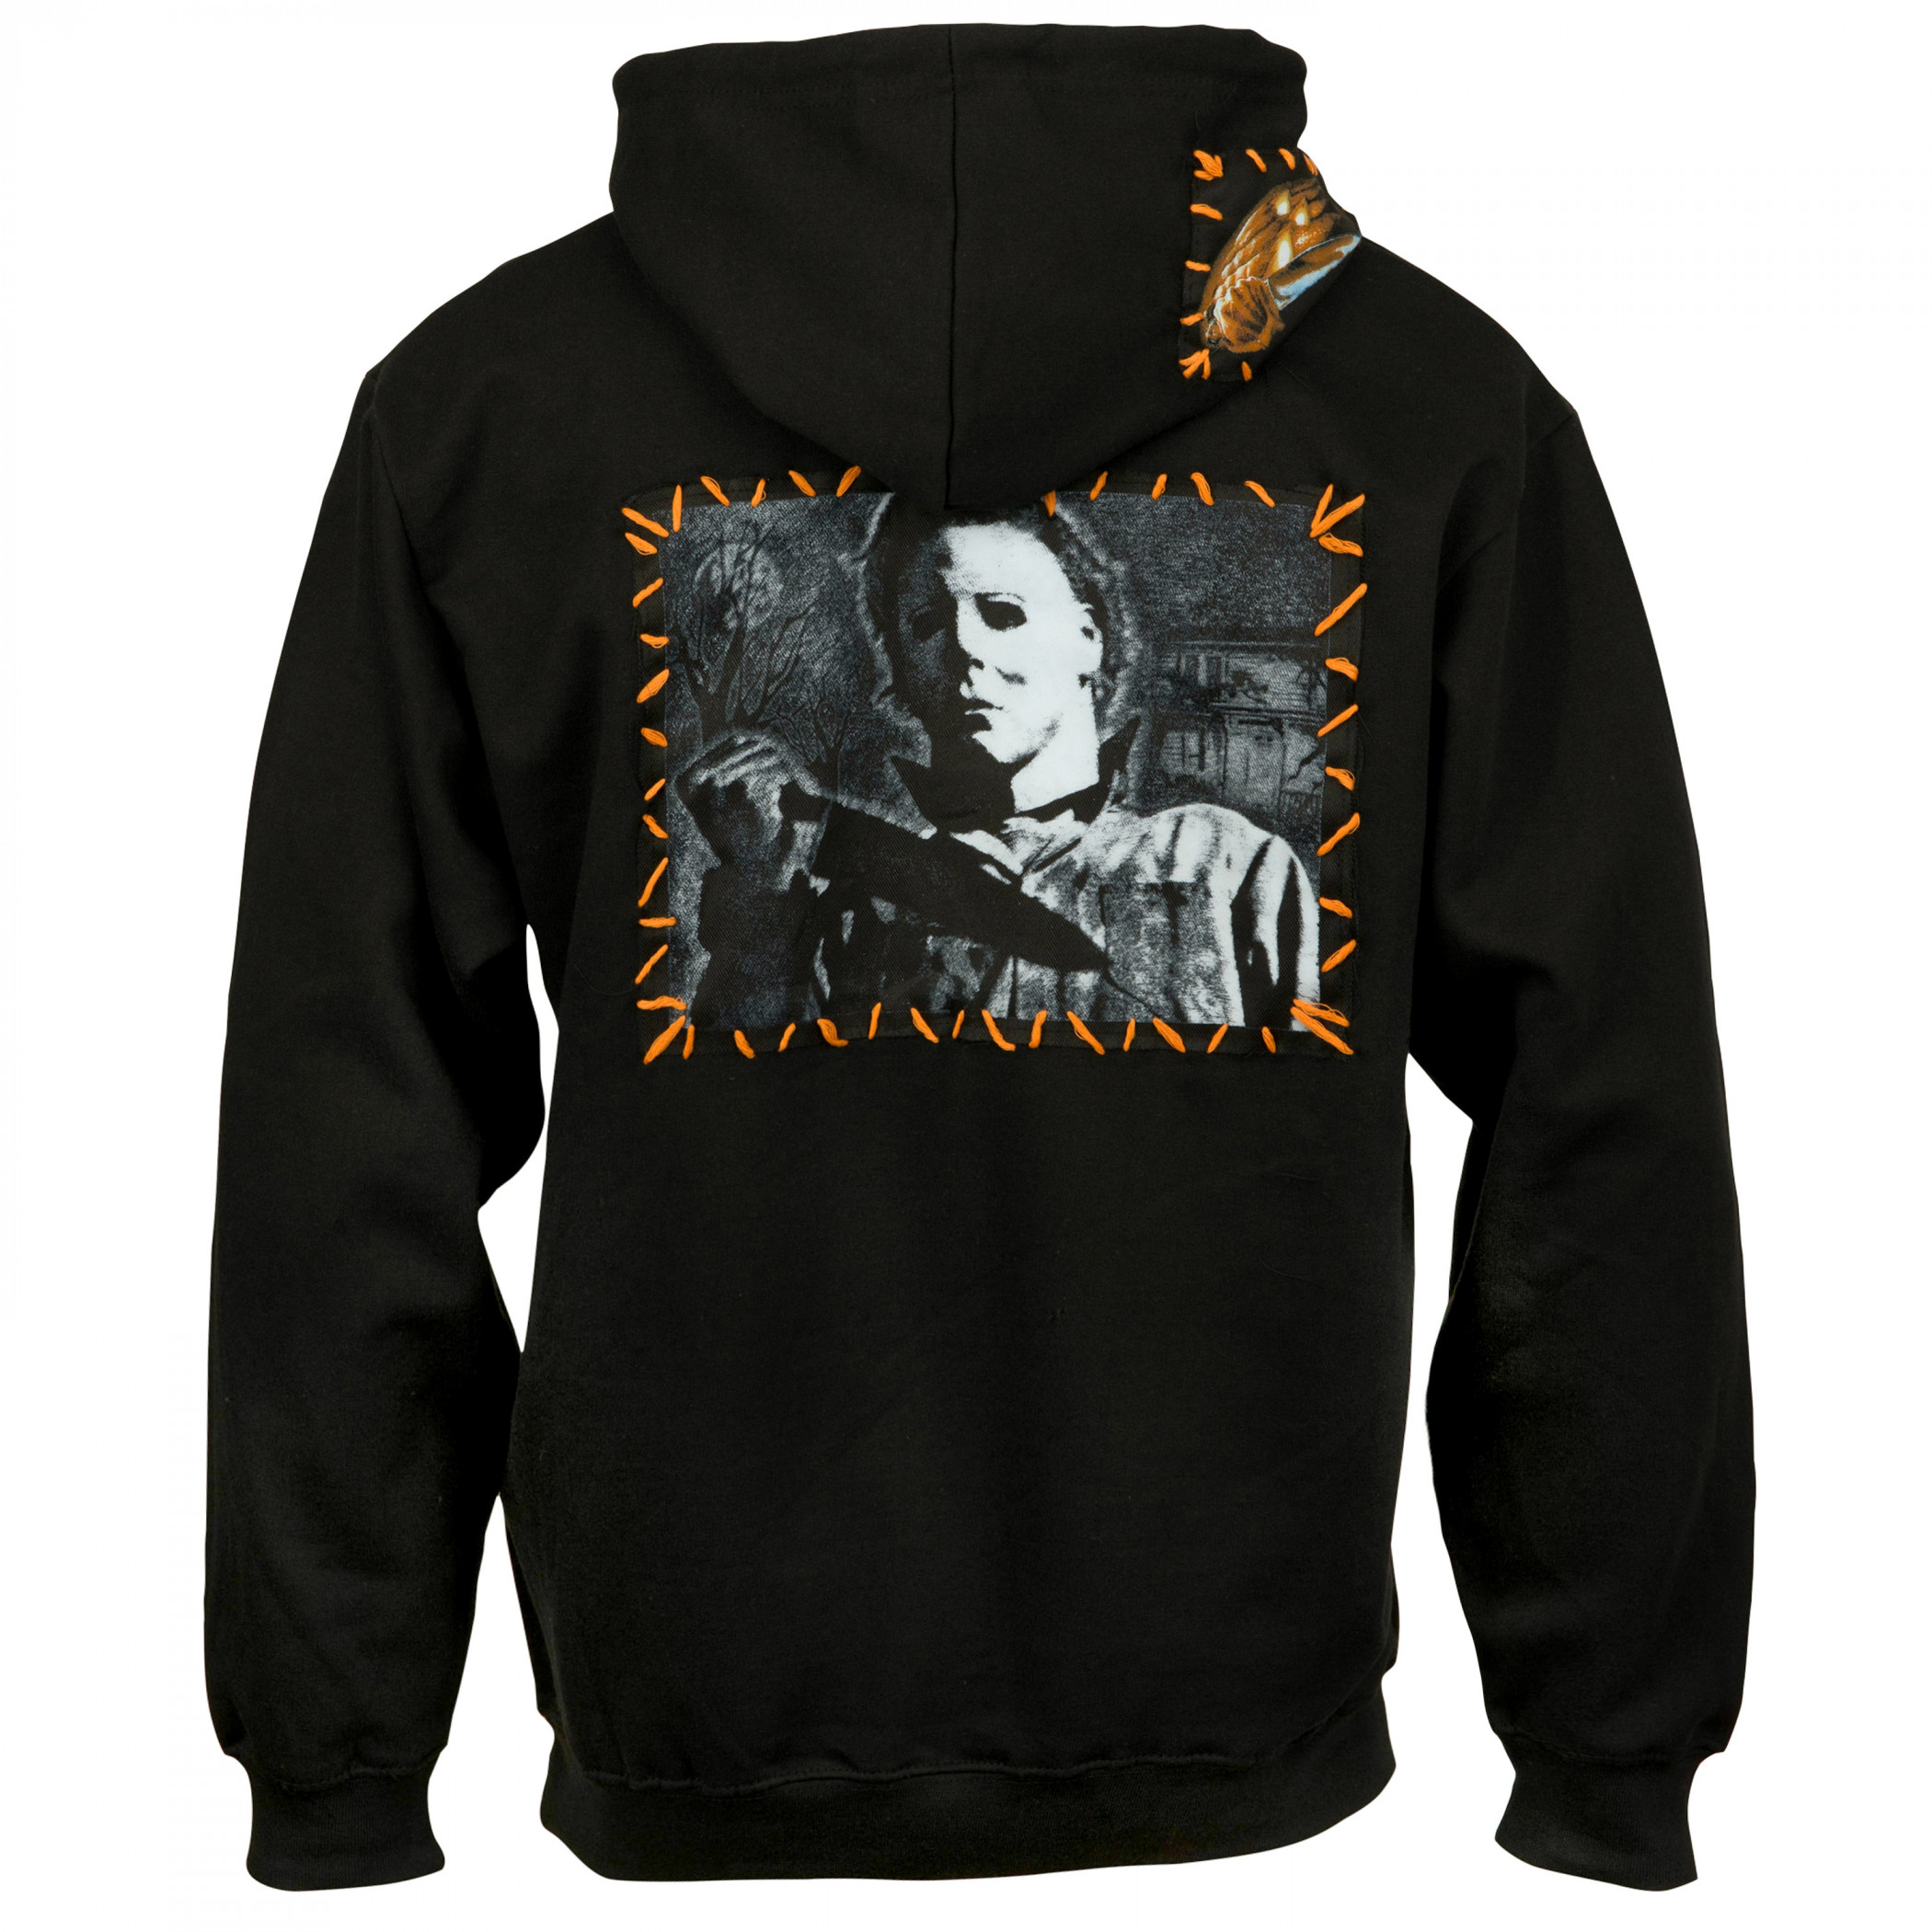 Halloween Michael Meyers Pullover Hoodie with Hand Sewn Patches